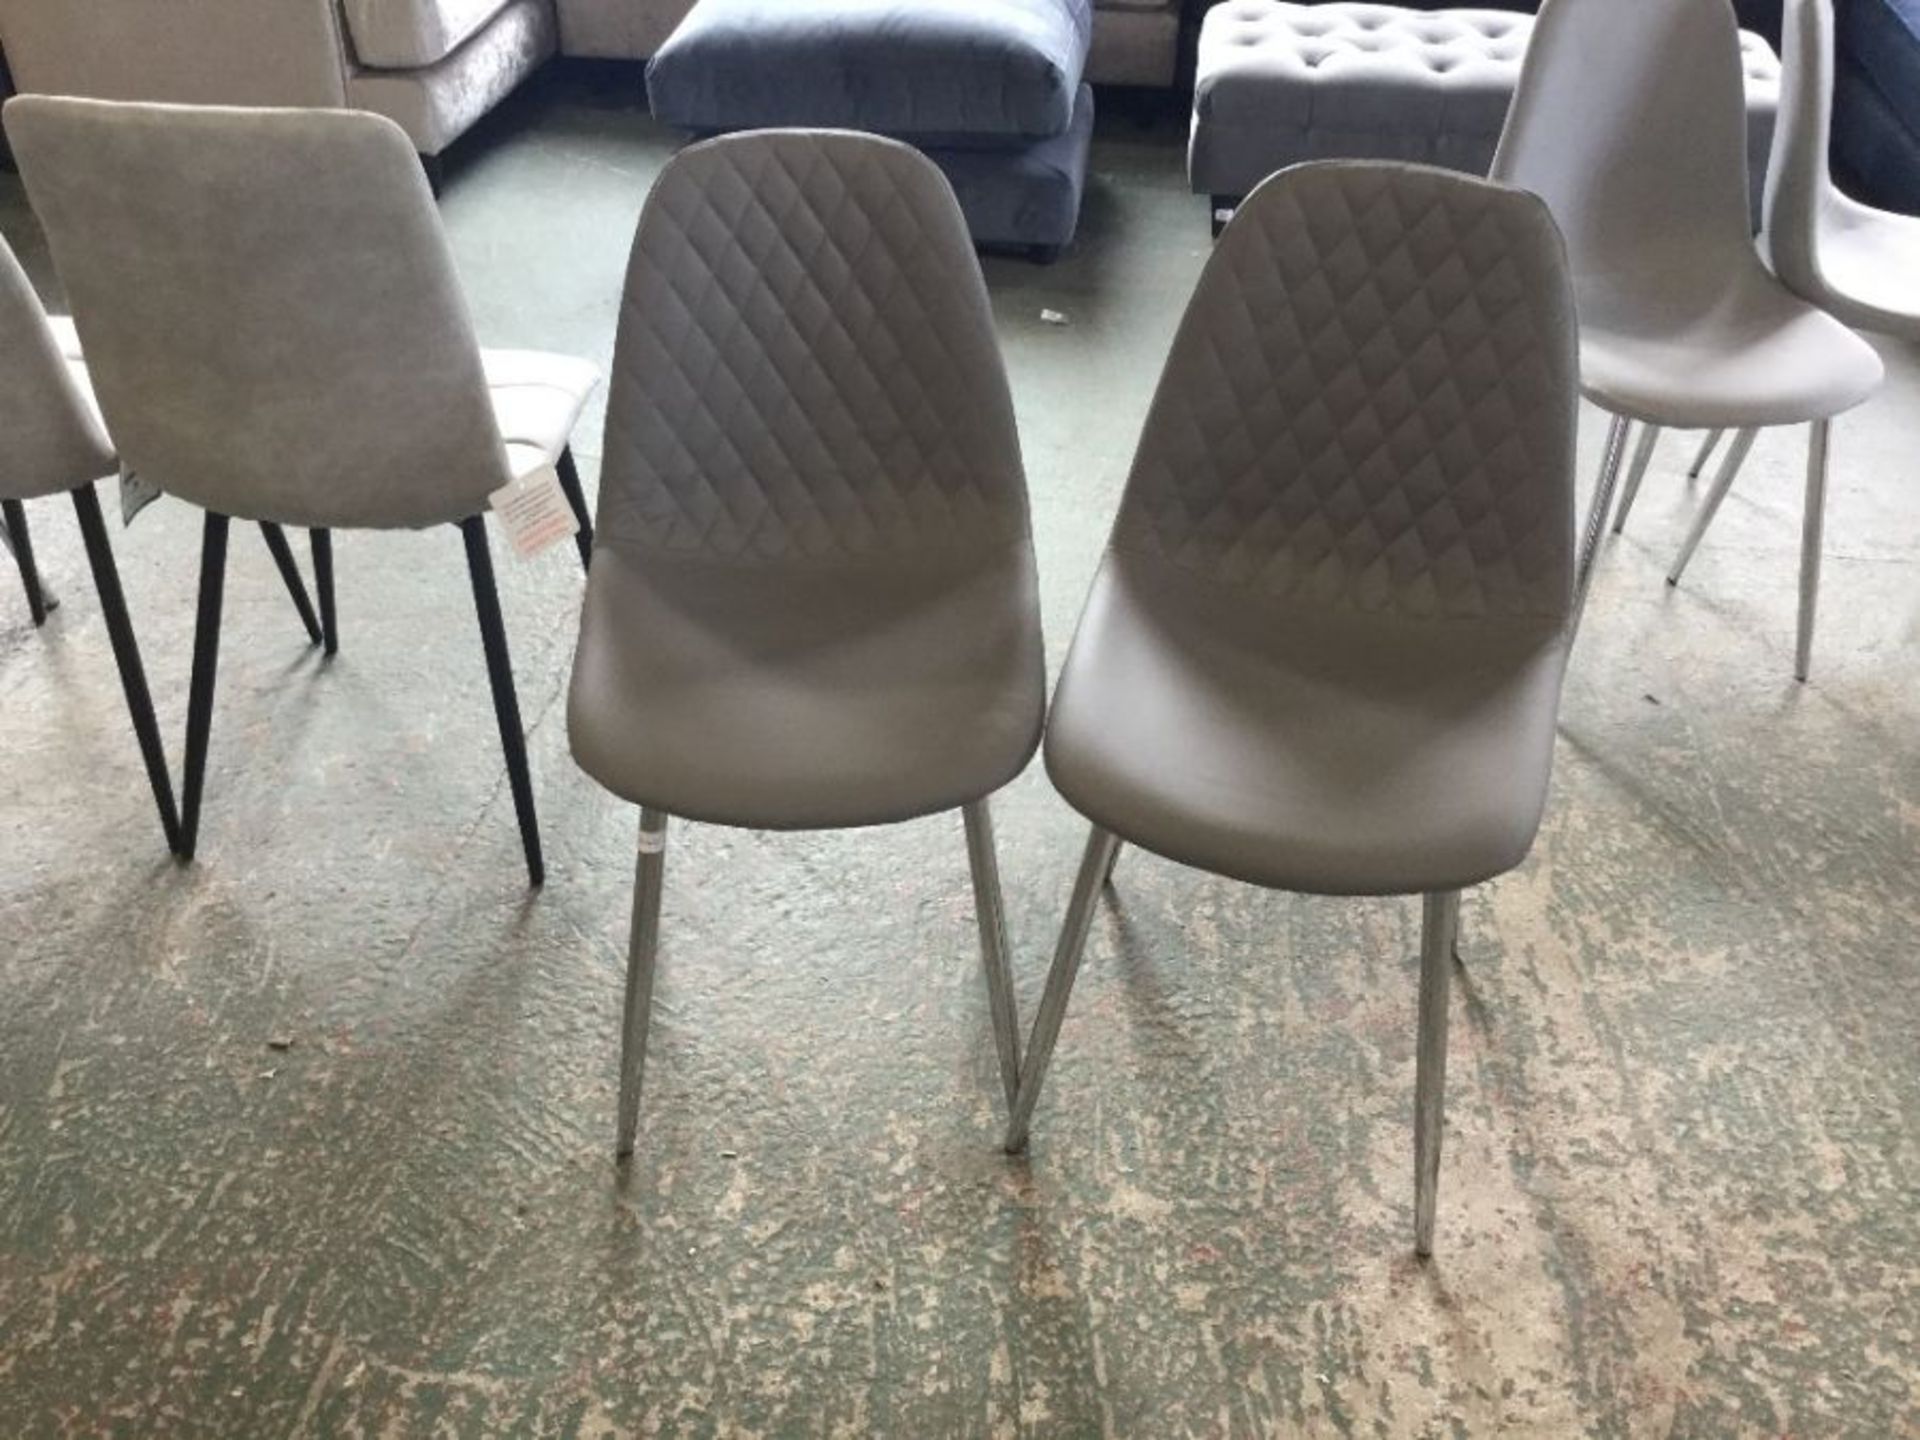 Canora Grey,Chowchilla Upholstered Cantilever Chair (Set of 2) Elephant Grey RRP -£145.99 (26844/